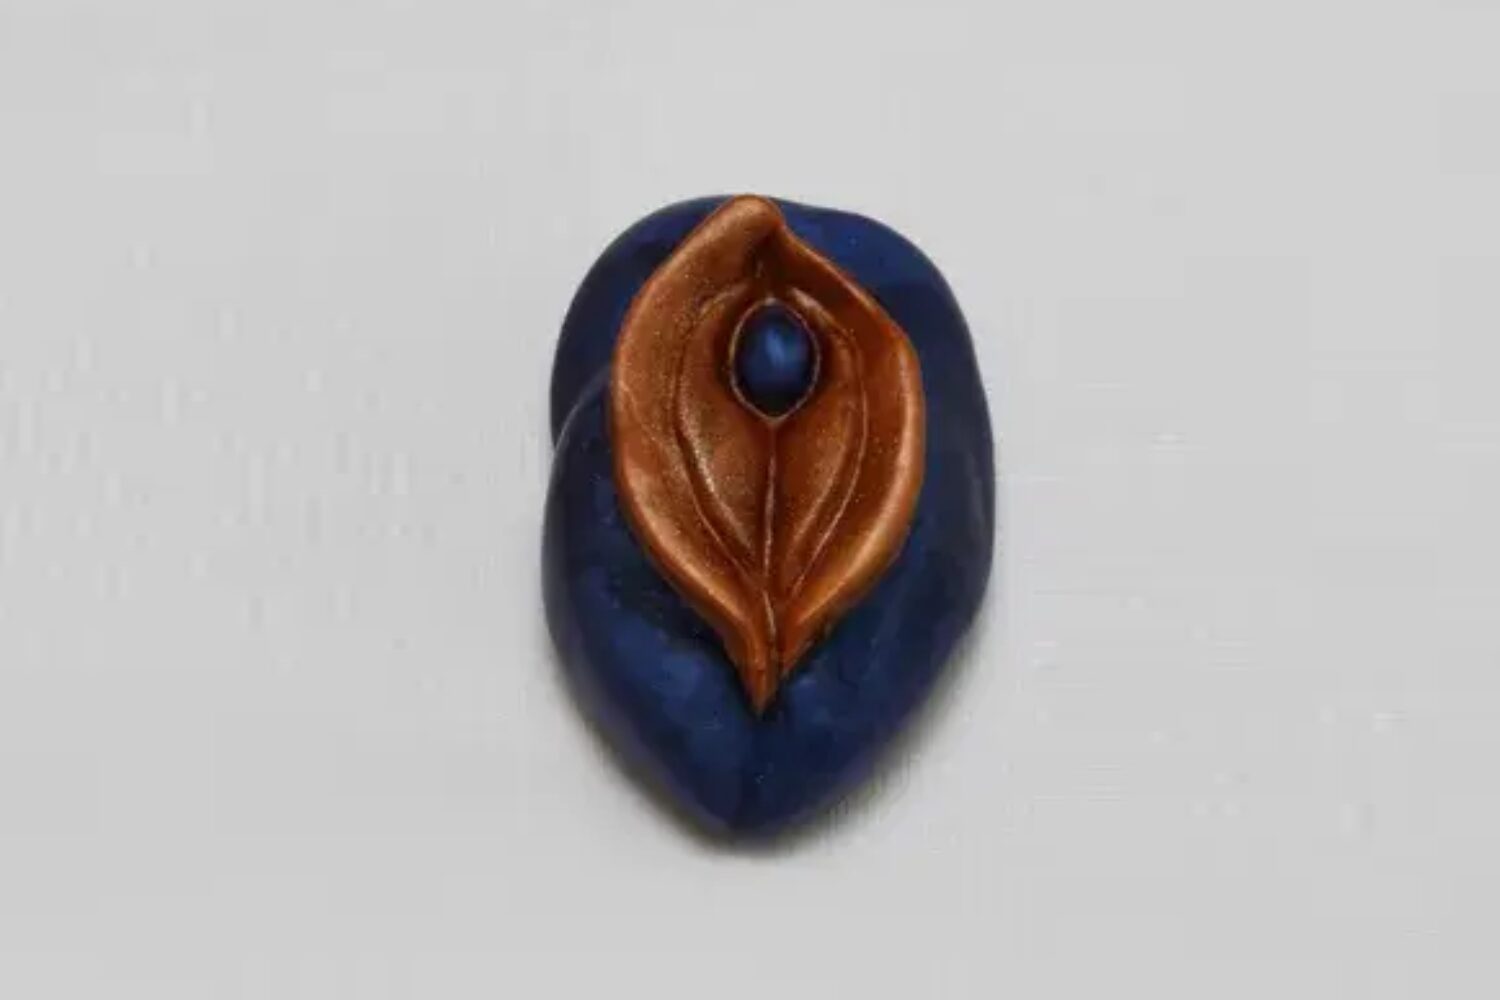 A blue and brown leaf with a small blue bead.